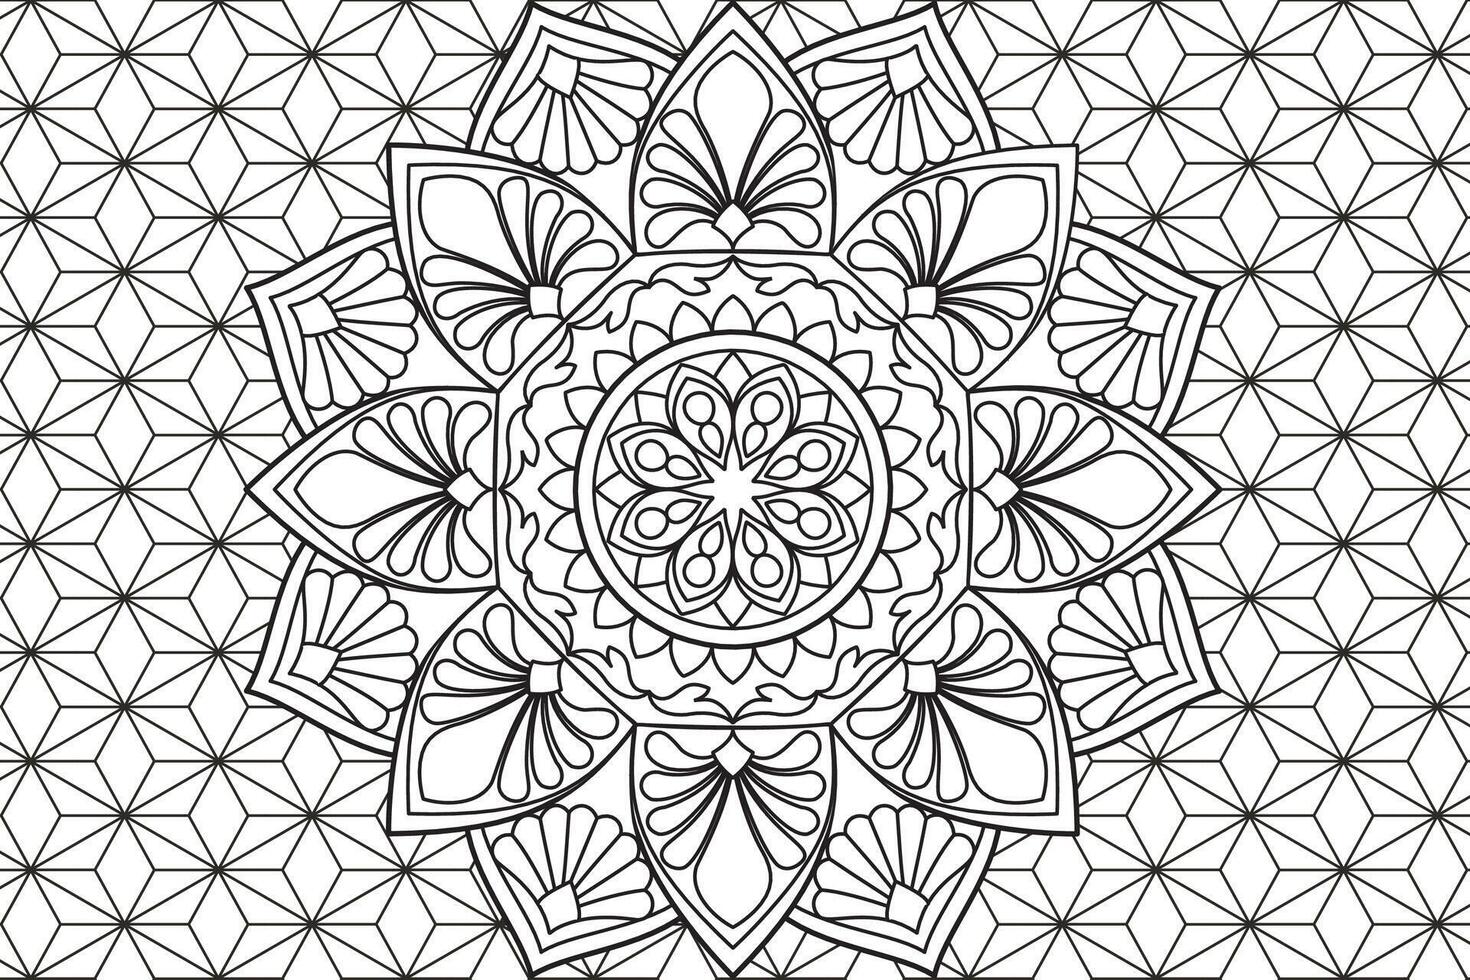 Mandala Coloring page for kids and adults Page for relaxation and meditation. Circular pattern. Decorative ornament ethnic oriental style. line art drawing coloring page. illustration vector